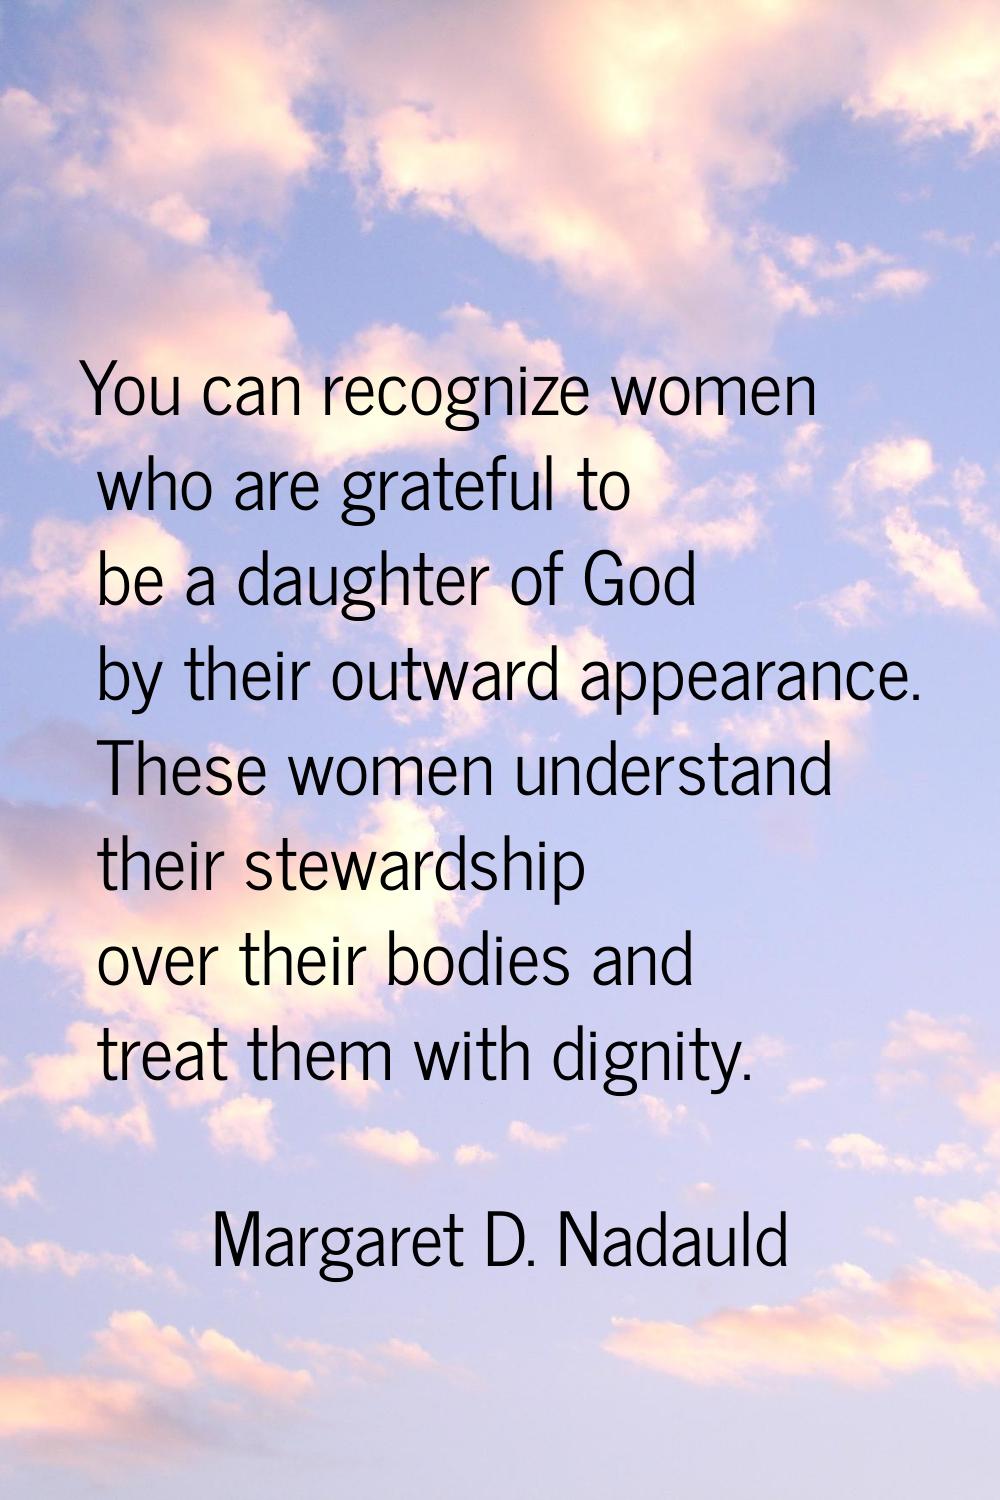 You can recognize women who are grateful to be a daughter of God by their outward appearance. These